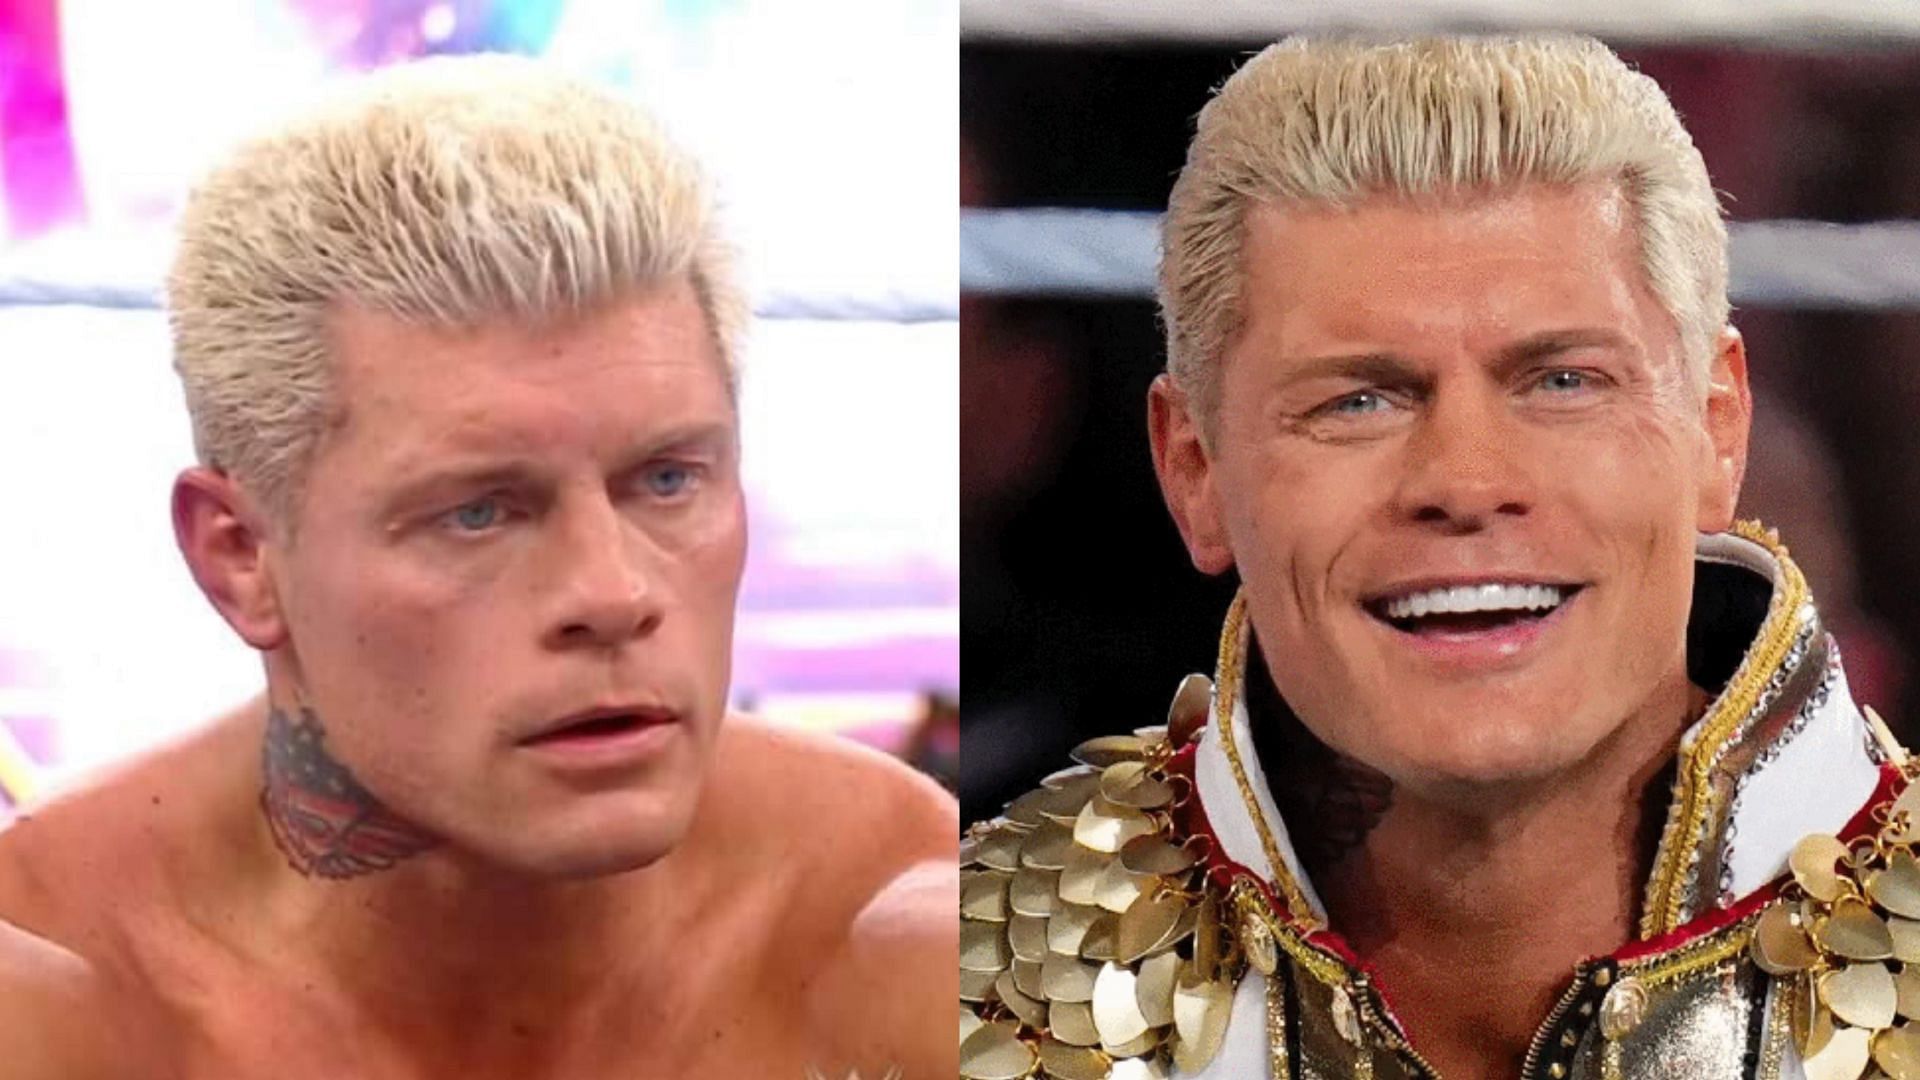 Cody Rhodes lost the main event of WrestleMania 39 against Roman Reigns.